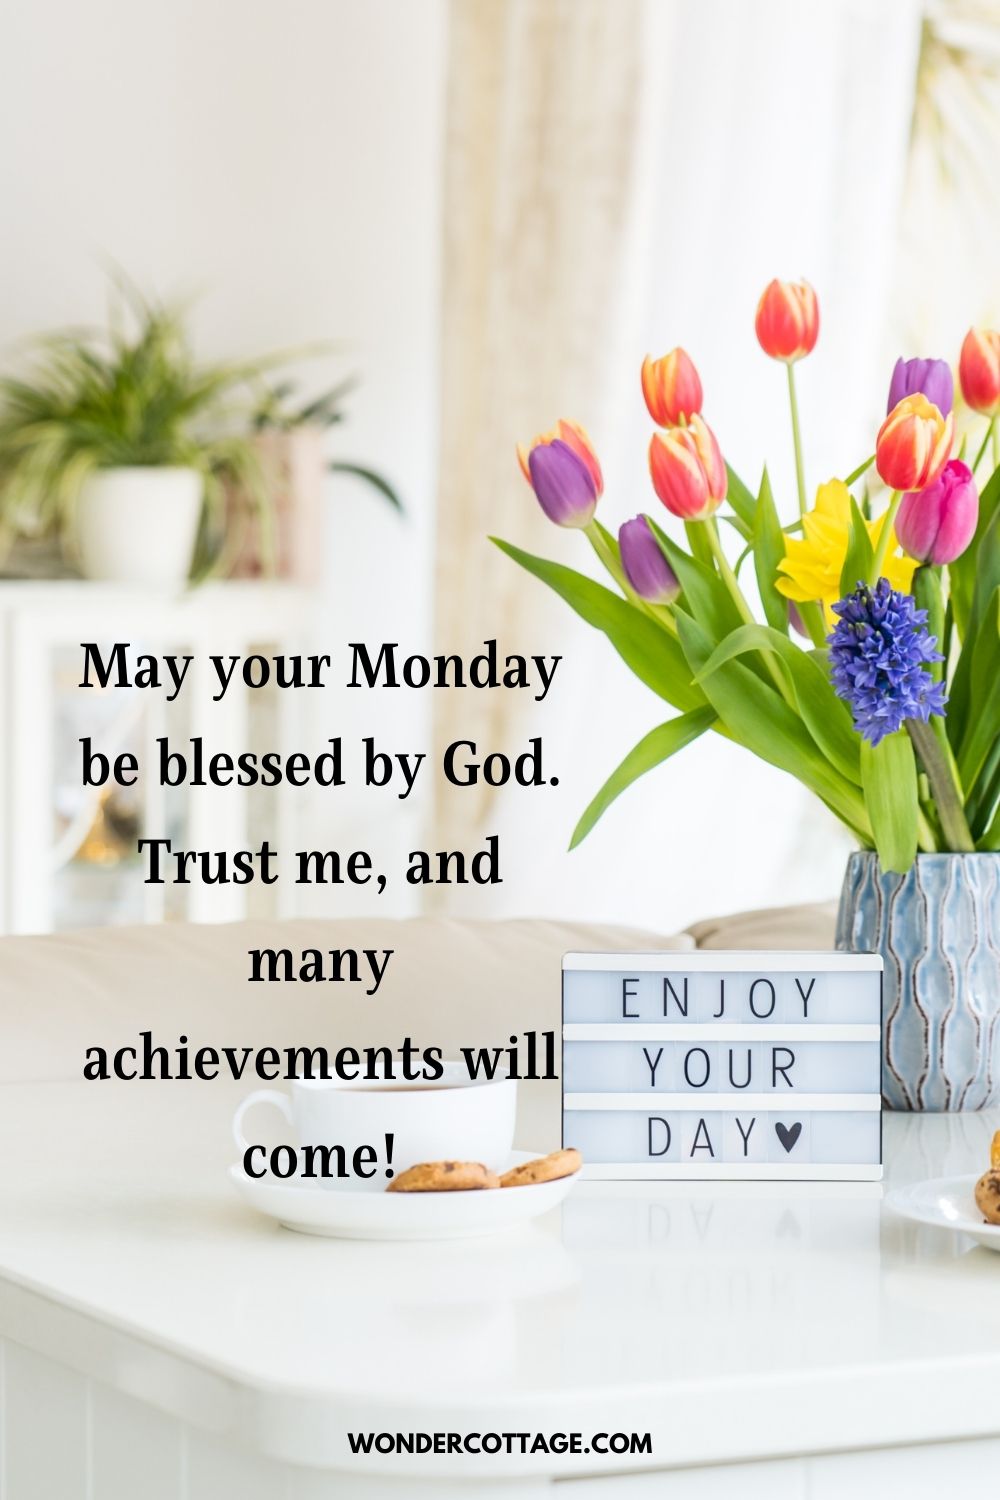 May your Monday be blessed by God. Trust me, and many achievements will come!